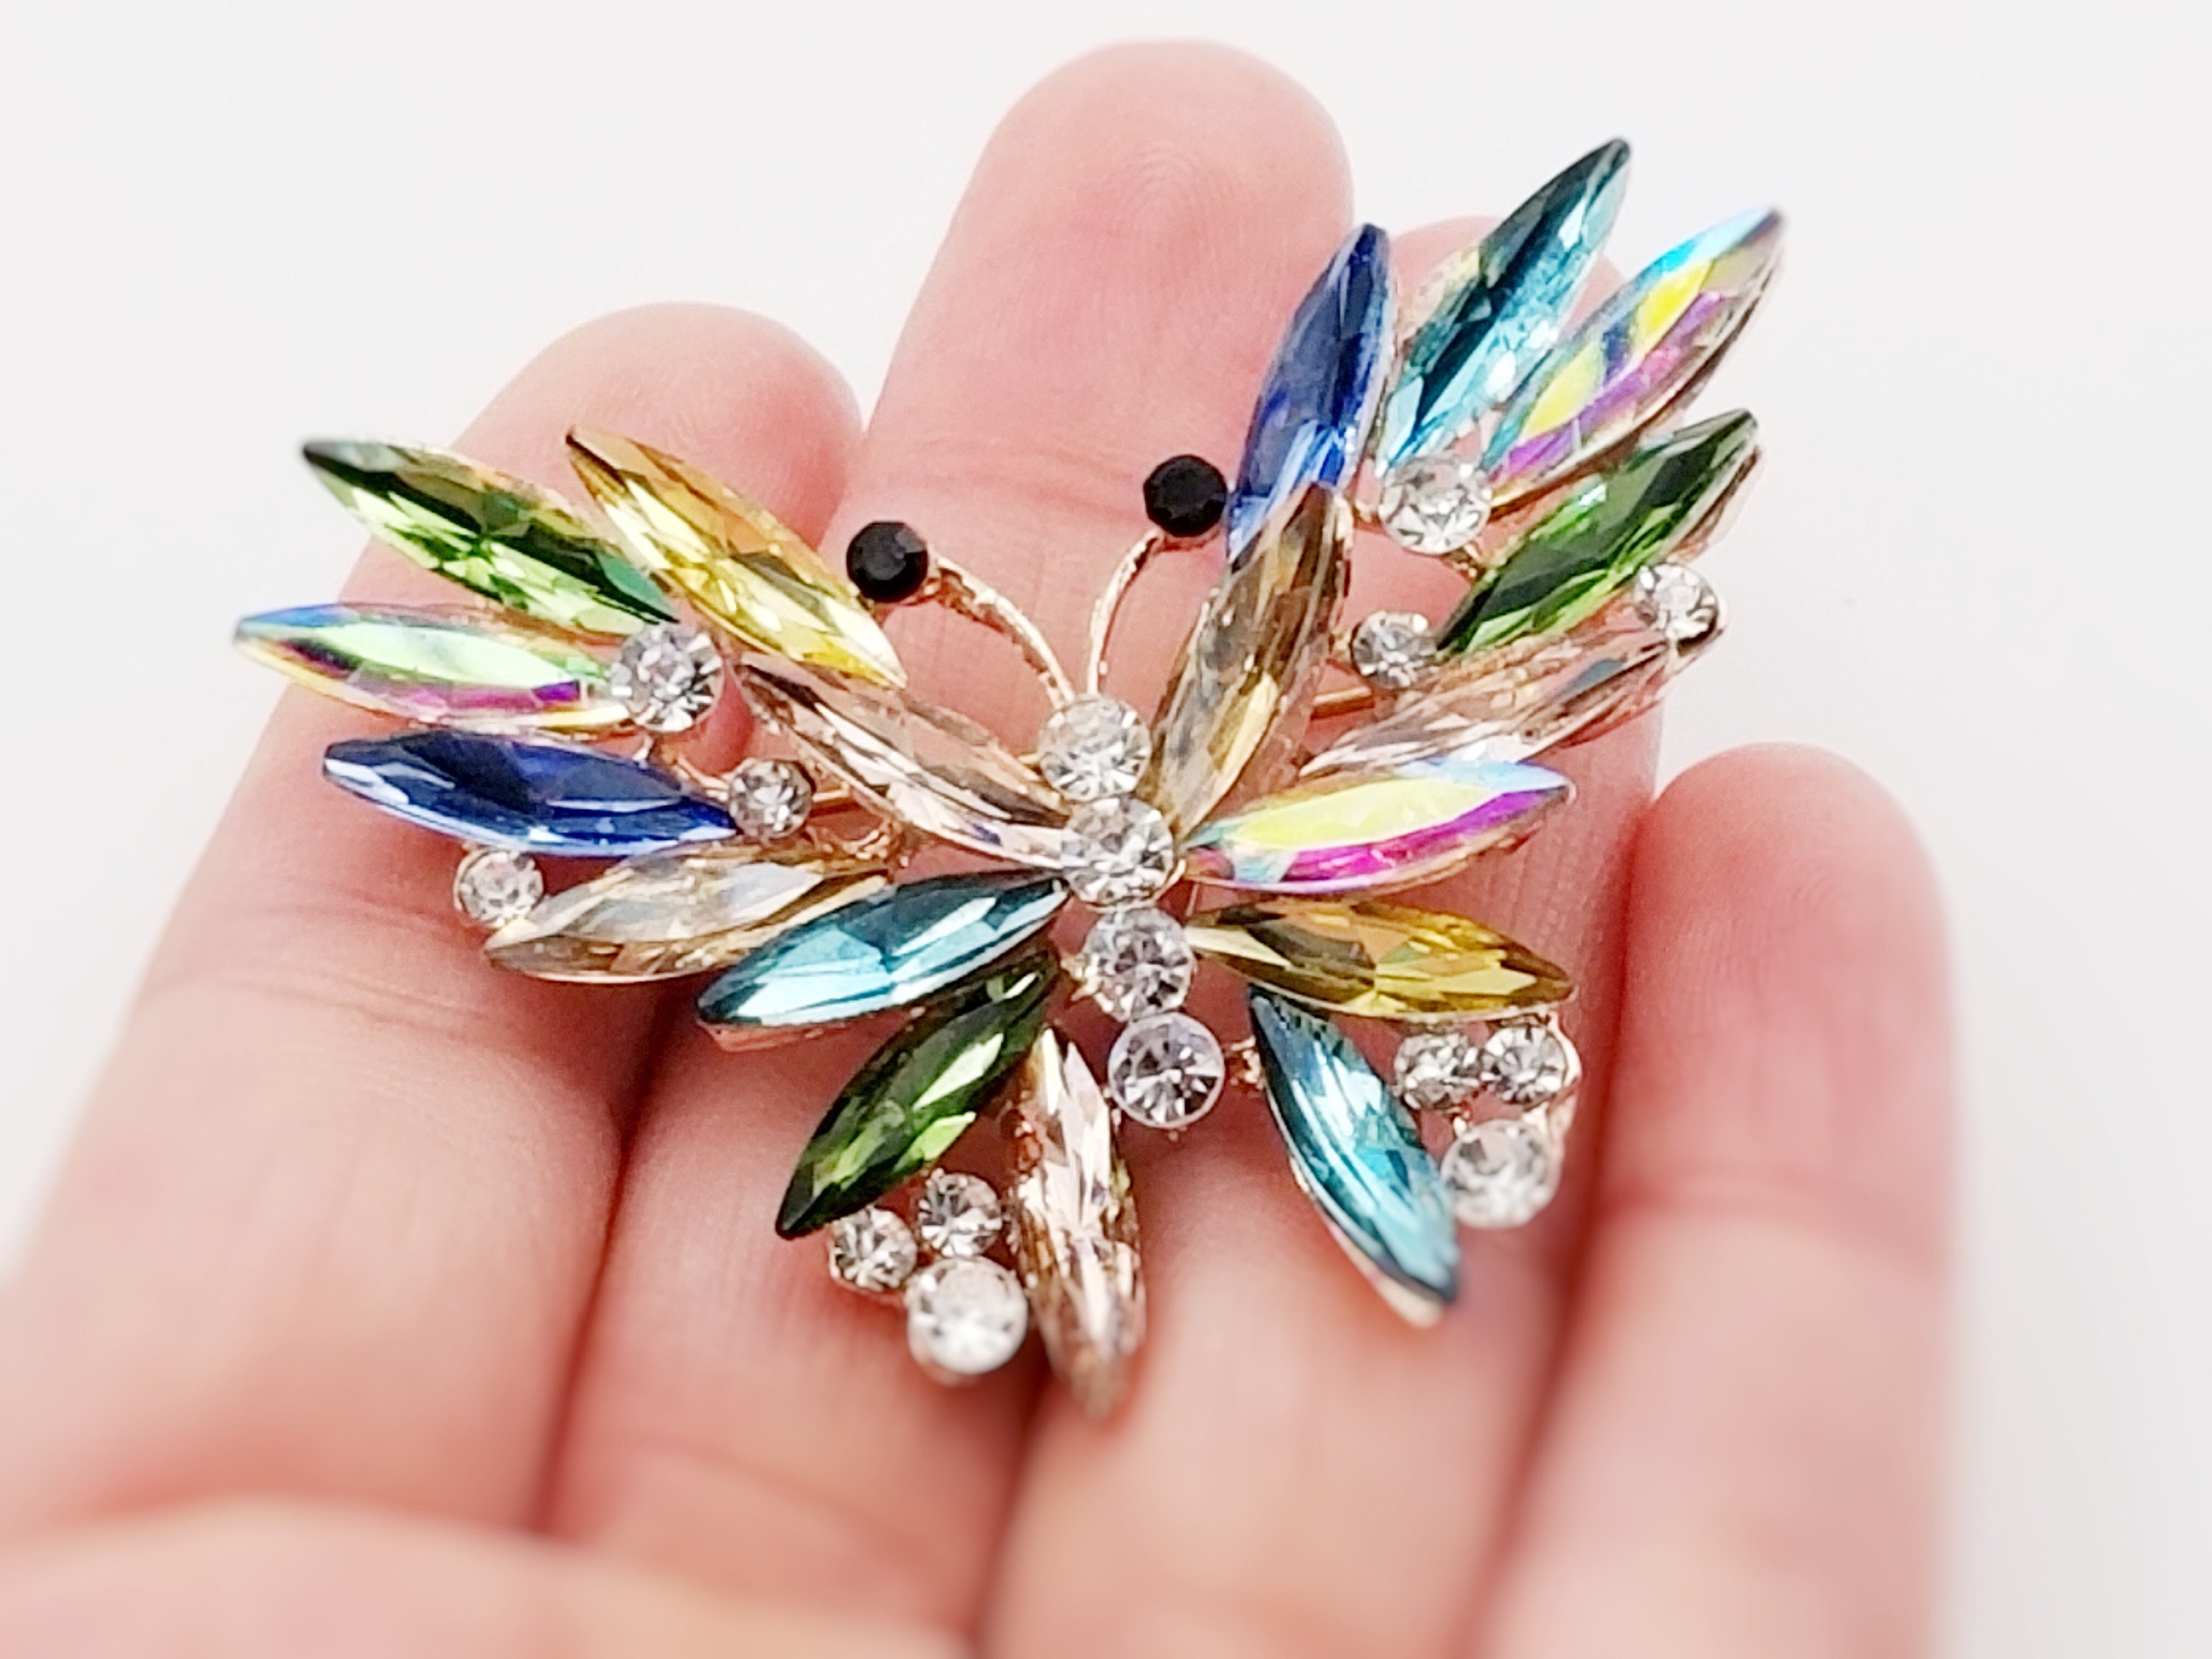 Vintage Large Butterfly Pin w/lots of Rhinestones - jewelry - by owner -  sale - craigslist